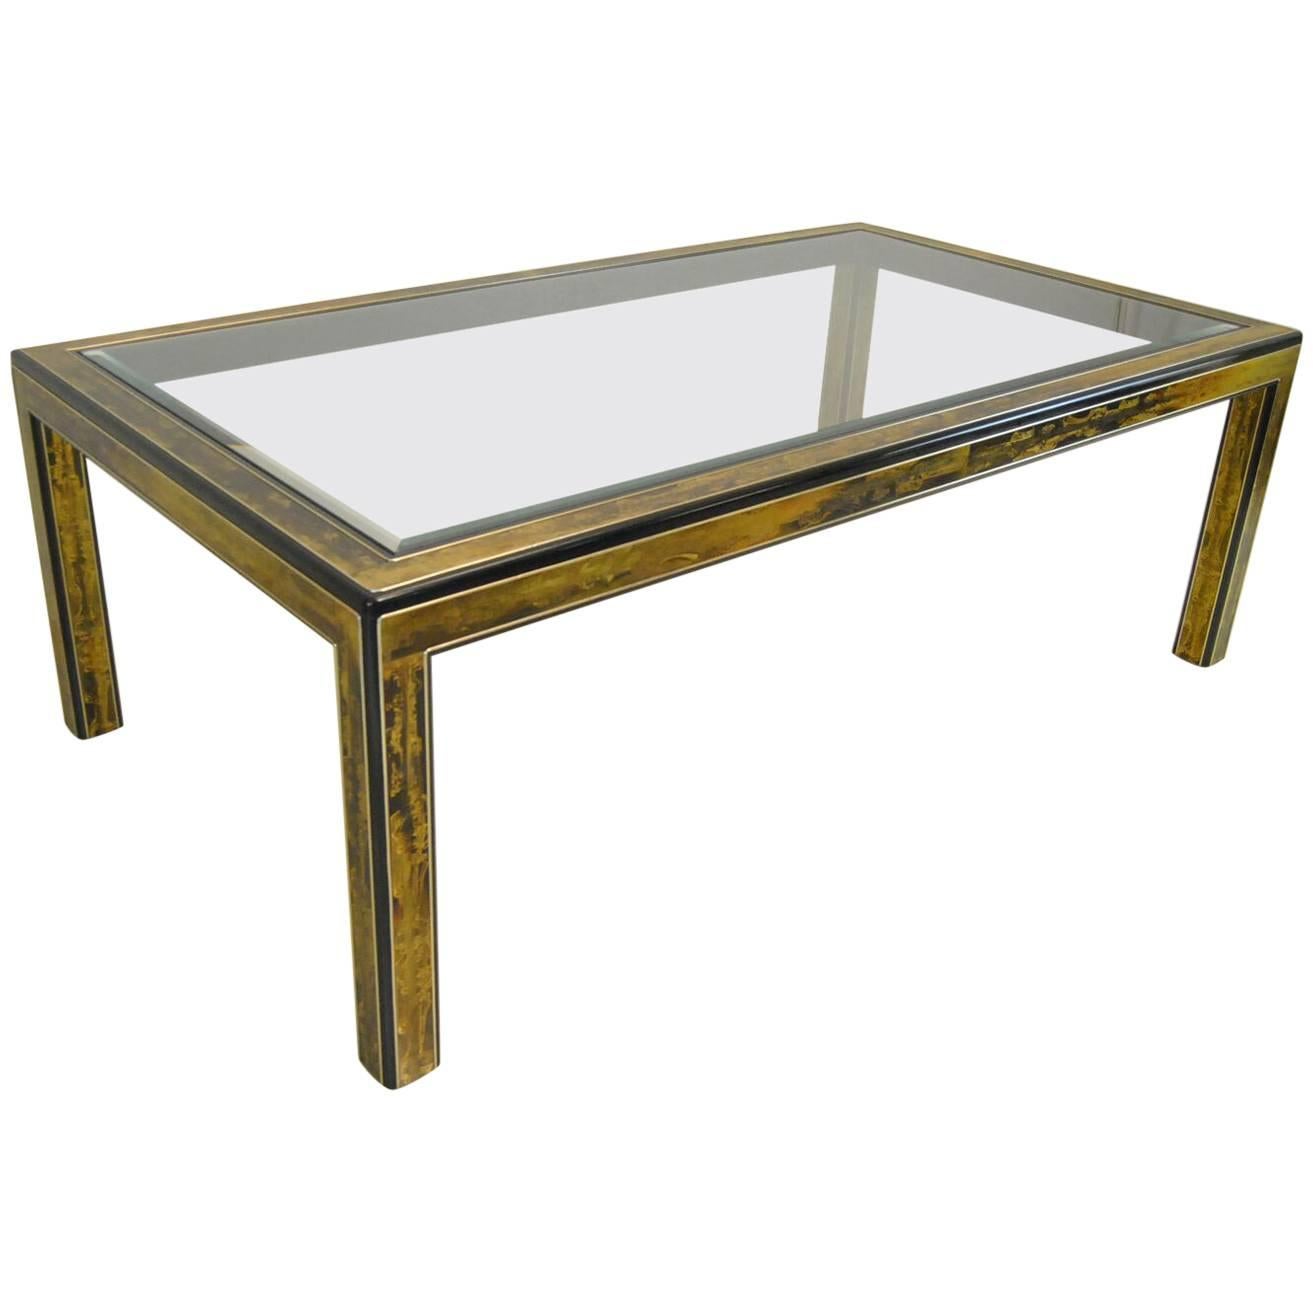 Etched Brass and Glass Top Dining Room Table by Bernard Rohne for Mastercraft